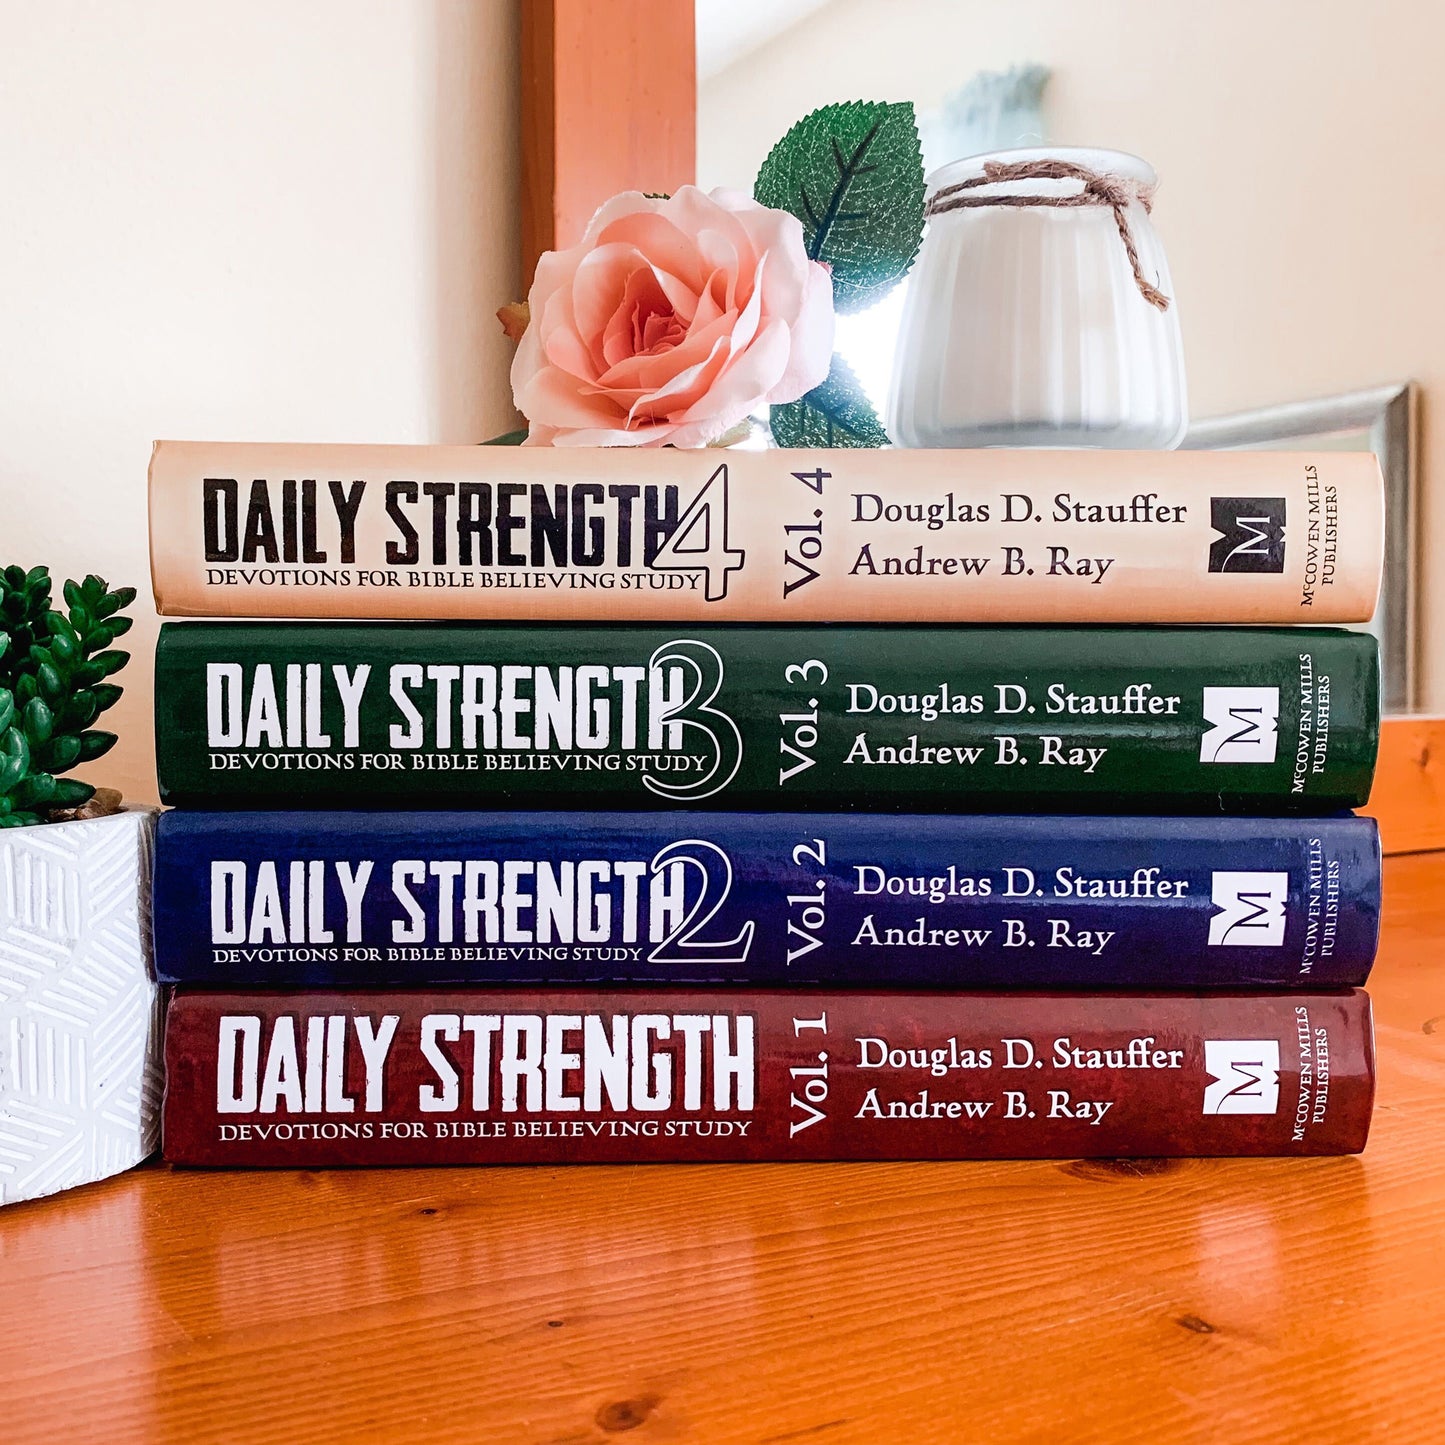 Daily Strength - Volumes 1 - 4: Devotions for Bible Believing Study (All Four Volumes)